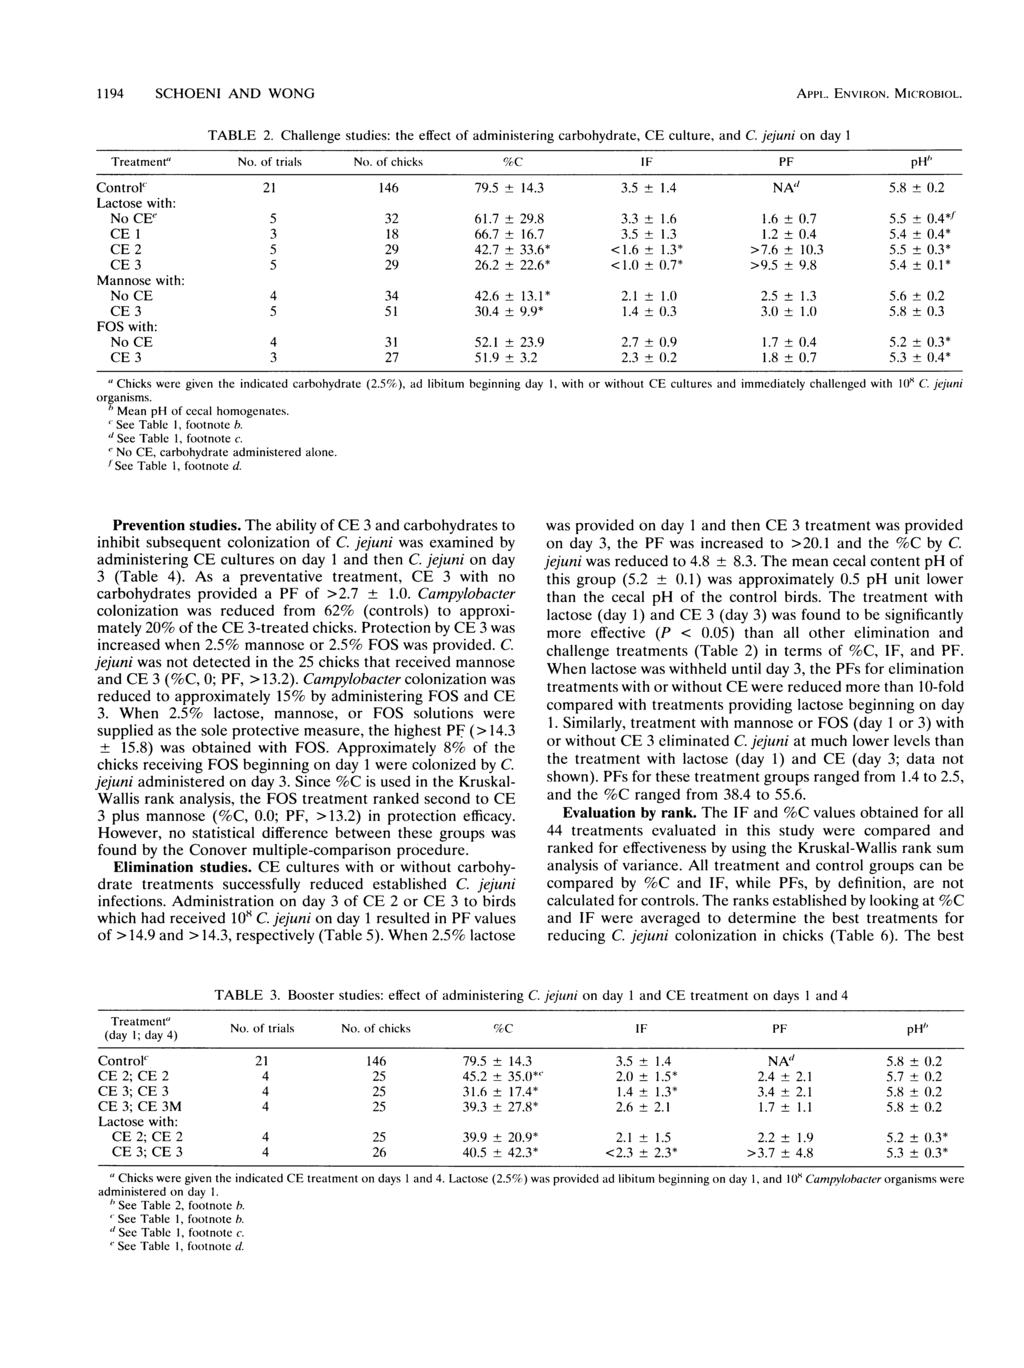 1194 SCHOENI AND WONG APPL. ENVIRON. MICROBIOL. TABLE 2. Challenge studies: the effect of administering carbohydrate, CE culture, and C. jejuni on day 1 Treatment' No. of trials No.